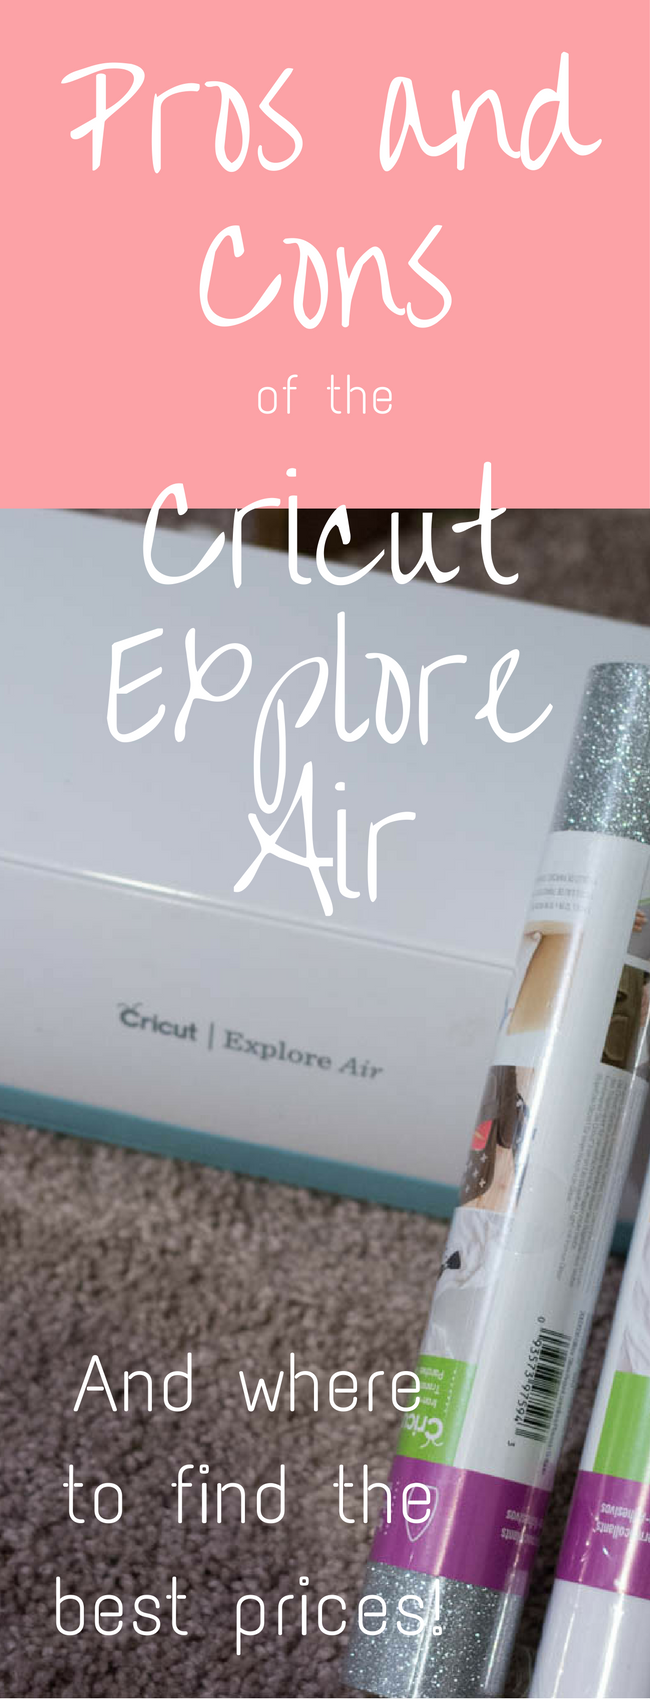 Pros and Cons of the Cricut Explore Air: A great guide if you are considering buying a Cricut!